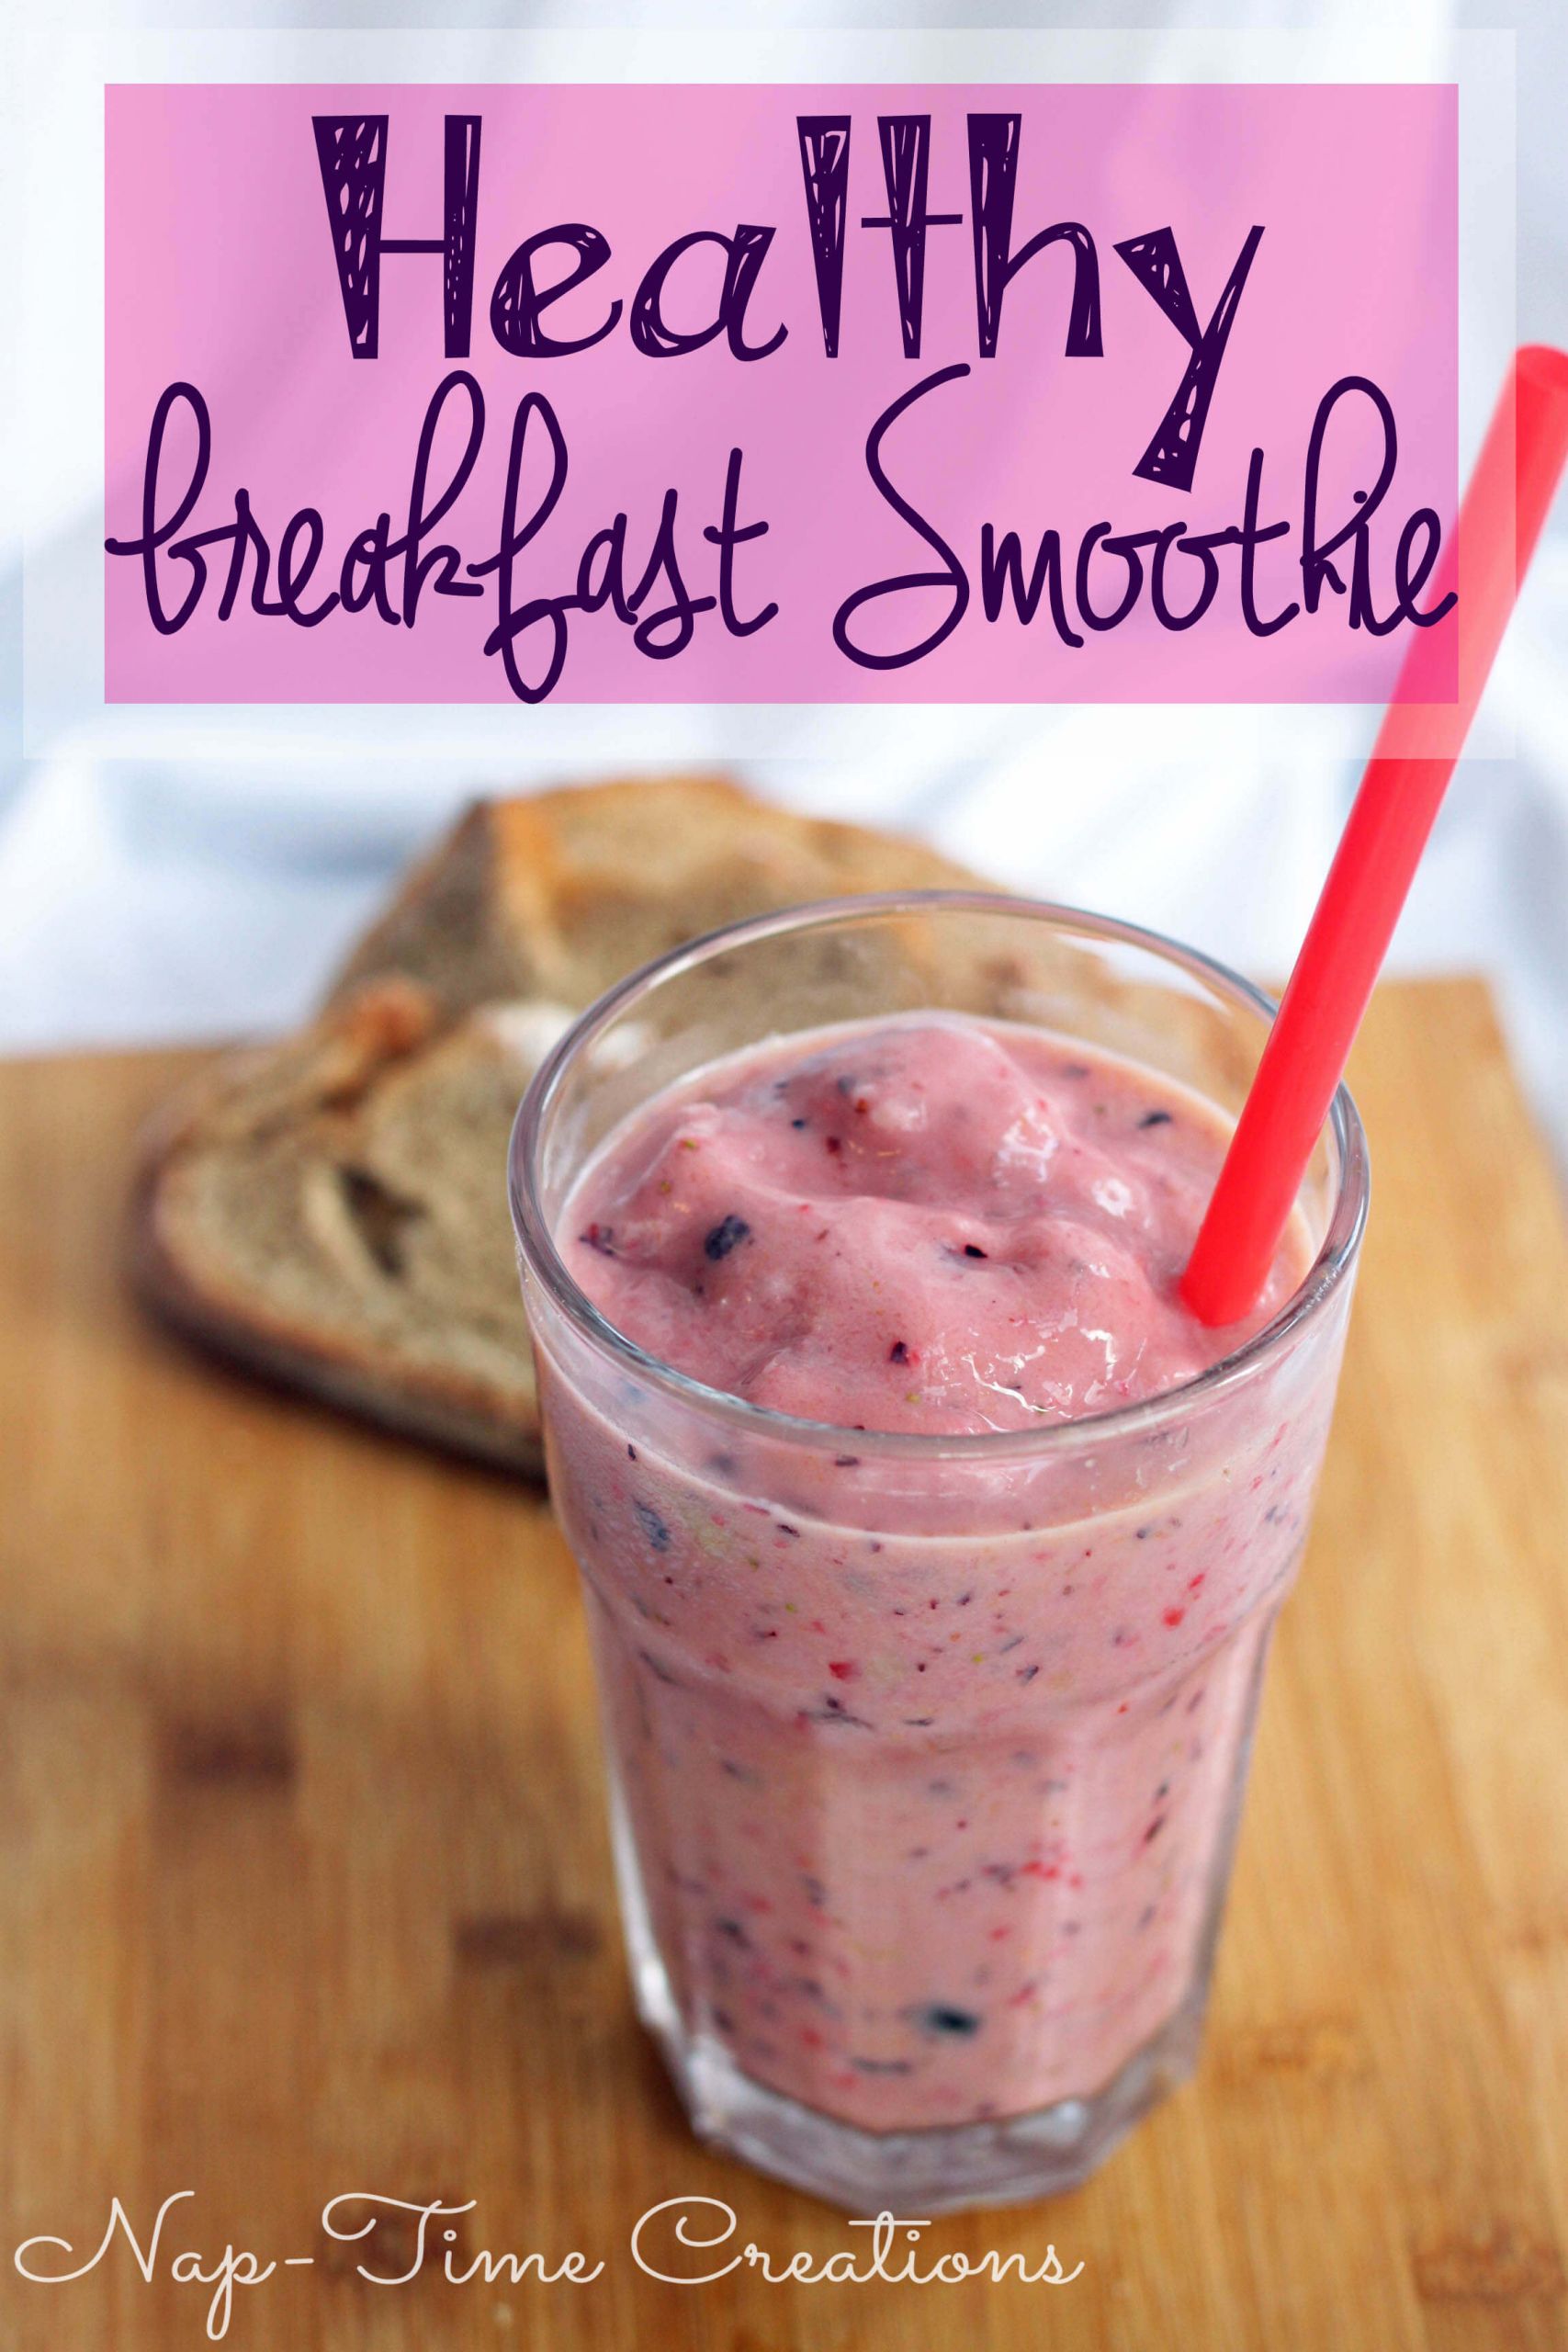 Breakfast Smoothie Recipes
 Healthy Breakfast Smoothie Recipe Life Sew Savory